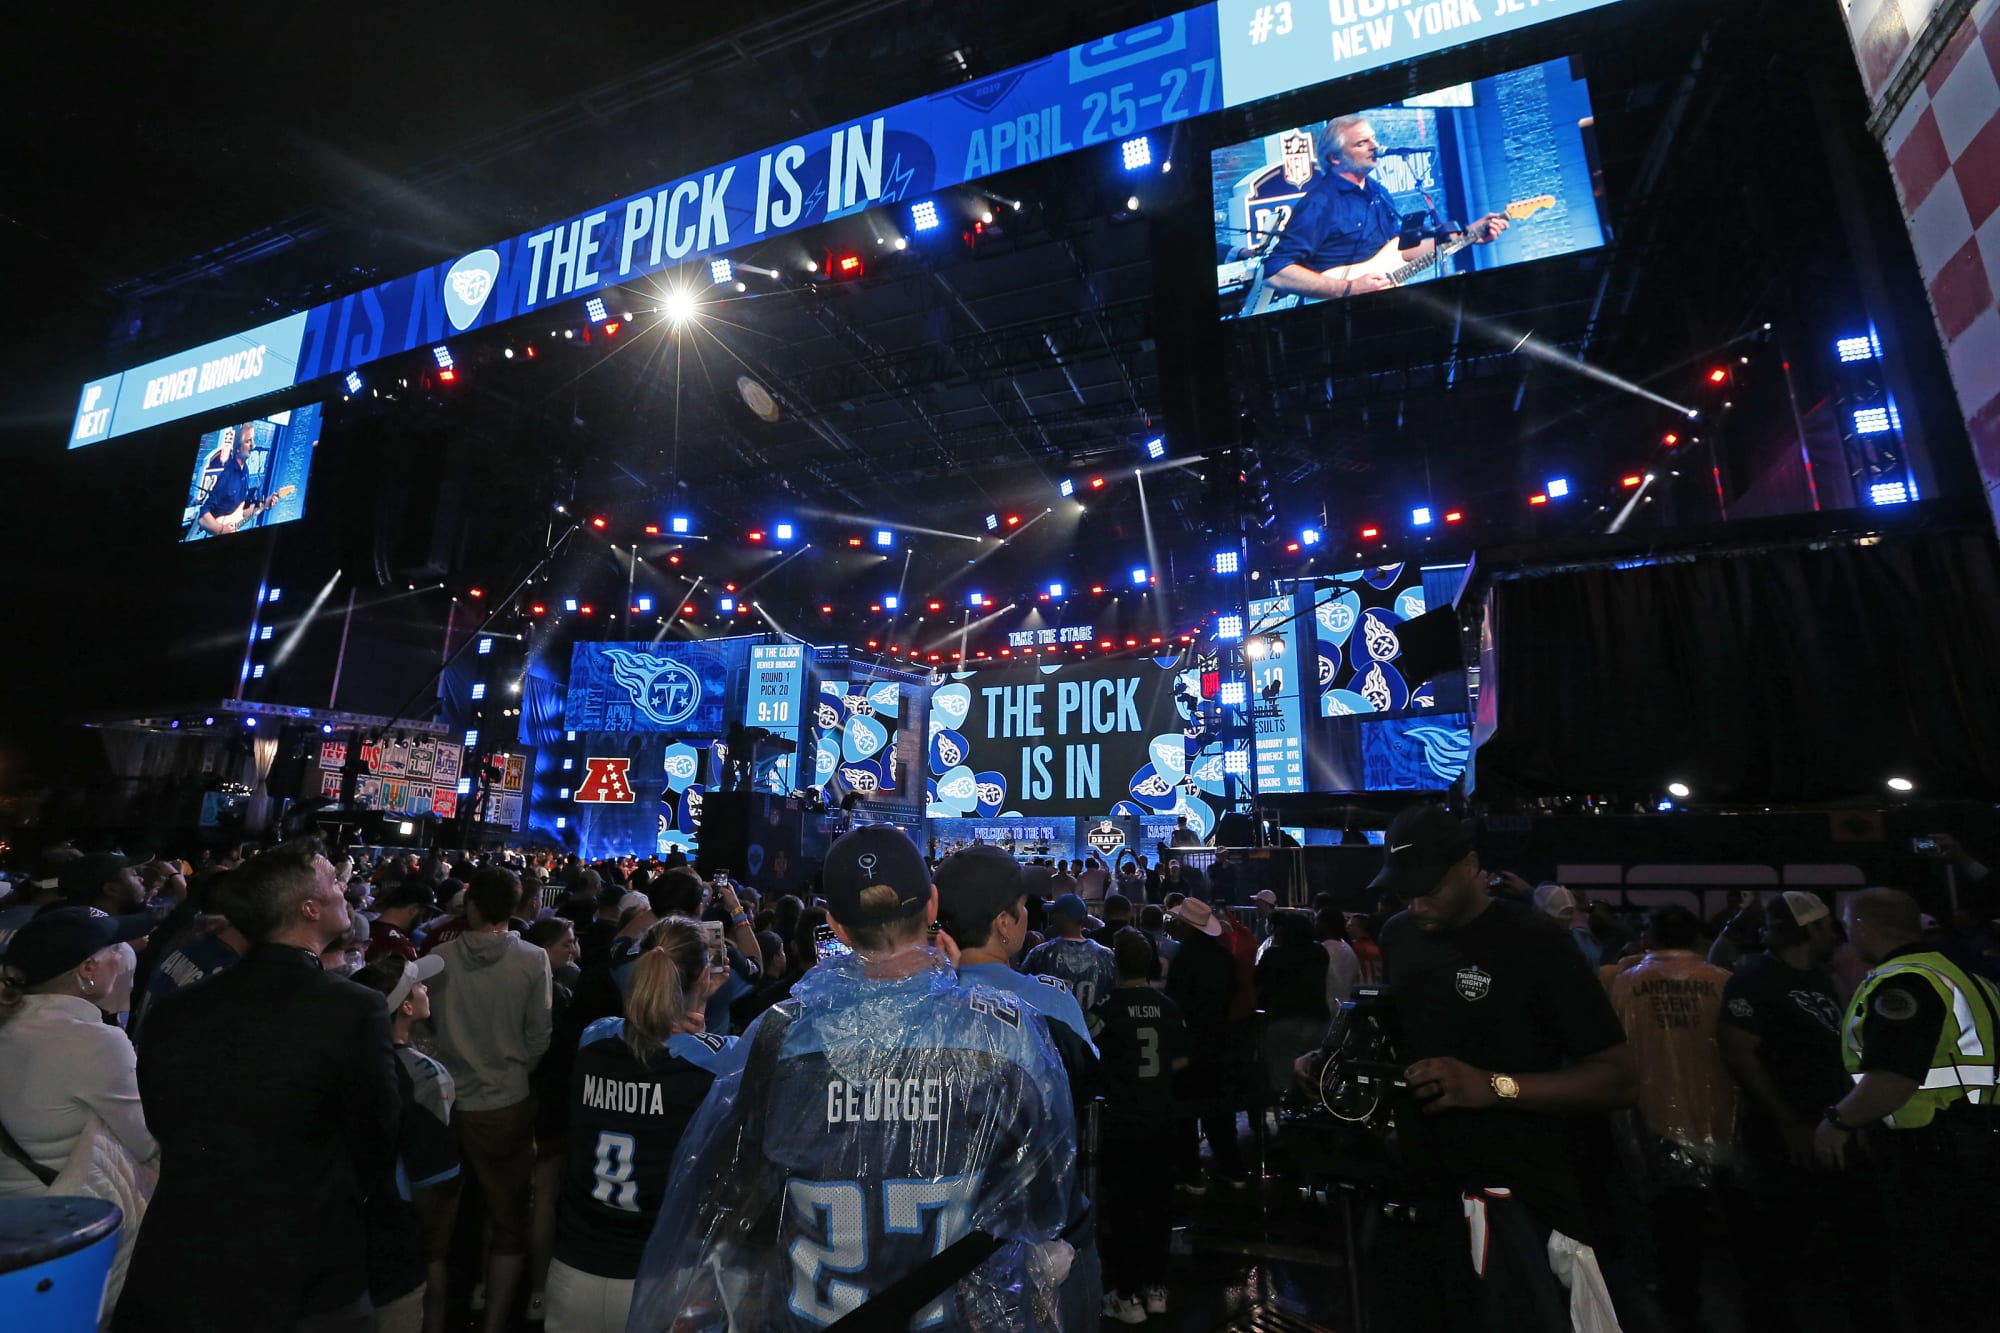 2023 NFL Draft will be 'one of the biggest events in the history of